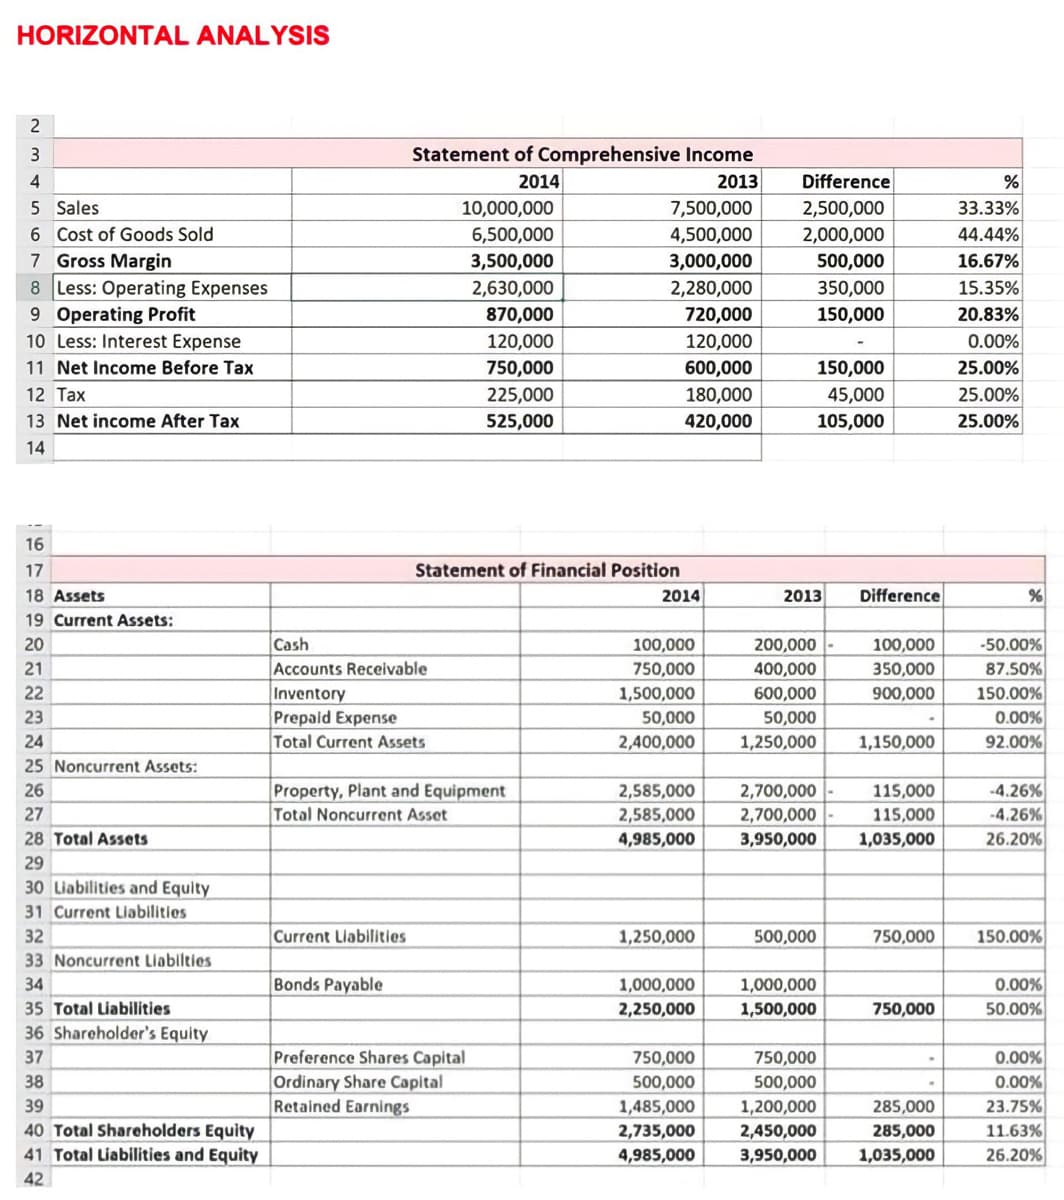 HORIZONTAL ANALYSIS
2
3
4
5 Sales
6 Cost of Goods Sold
7 Gross Margin
8 Less: Operating Expenses
9 Operating Profit
10 Less: Interest Expense
11 Net Income Before Tax
12 Tax
13 Net income After Tax
14
16
17
18 Assets
19 Current Assets:
20
21
22
23
24
25 Noncurrent Assets:
26
27
28 Total Assets
29
30 Liabilities and Equity
31 Current Liabilities
32
33 Noncurrent Liabilties
34
35 Total Liabilities
36 Shareholder's Equity
37
38
39
40 Total Shareholders Equity
41 Total Liabilities and Equity
42
Statement of Comprehensive Income
2014
2013
Cash
Accounts Receivable
Inventory
Prepaid Expense
Total Current Assets
Current Liabilities
Bonds Payable
10,000,000
6,500,000
3,500,000
2,630,000
870,000
Property, Plant and Equipment
Total Noncurrent Asset
120,000
750,000
225,000
525,000
Statement of Financial Position
Preference Shares Capital
Ordinary Share Capital
Retained Earnings
7,500,000
4,500,000
3,000,000
2,280,000
720,000
120,000
600,000
180,000
420,000
2014
100,000
750,000
1,500,000
50,000
2,400,000
2,585,000
2,585,000
4,985,000
1,250,000
1,000,000
2,250,000
750,000
500,000
1,485,000
2,735,000
4,985,000
Difference
2,500,000
2,000,000
500,000
350,000
150,000
2013 Difference
200,000-
400,000
600,000
50,000
1,250,000
150,000
45,000
105,000
500,000
1,000,000
1,500,000
2,700,000 - 115,000
2,700,000
115,000
3,950,000
1,035,000
750,000
500,000
100,000
350,000
900,000
1,200,000
2,450,000
3,950,000
1,150,000
750,000
750,000
.
285,000
285,000
1,035,000
%
33.33%
44.44%
16.67%
15.35%
20.83%
0.00%
25.00%
25.00%
25.00%
%
-50.00%
87.50%
150.00%
0.00%
92.00%
-4.26%
-4.26%
26.20%
150.00%
0.00%
50.00%
0.00%
0.00%
23.75%
11.63%
26.20%